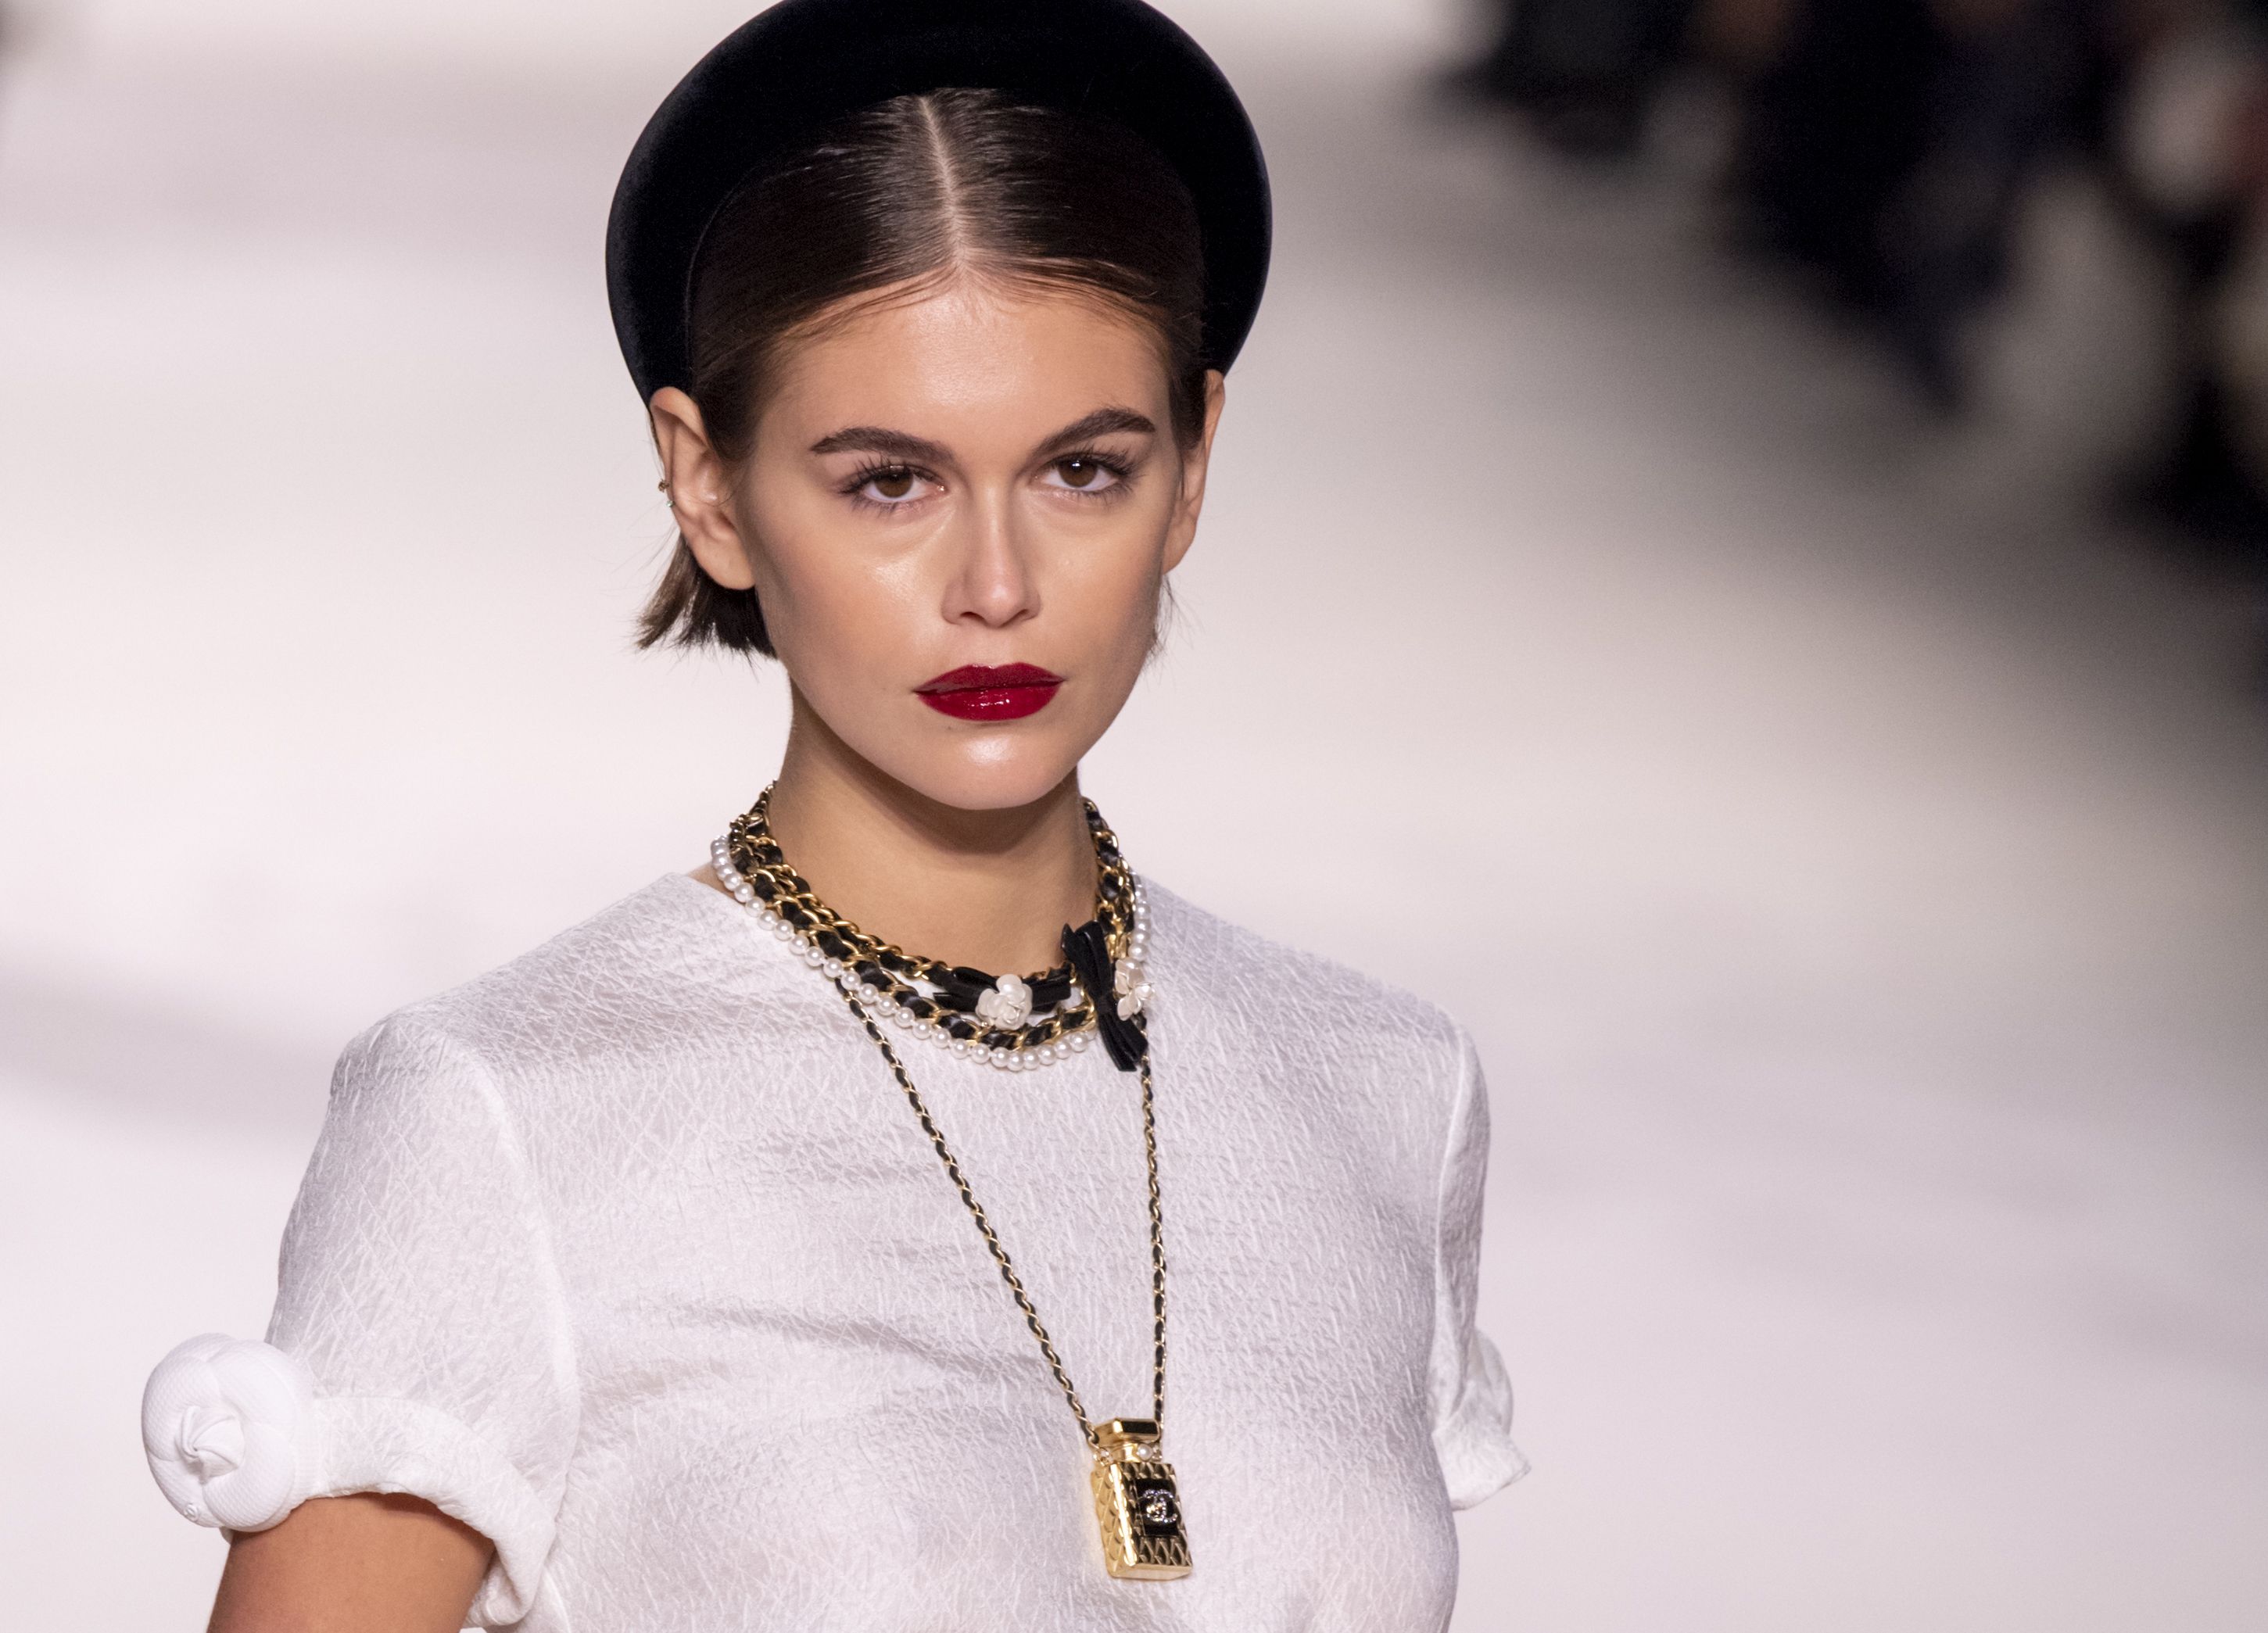 A Chanel show is coming to London this summer